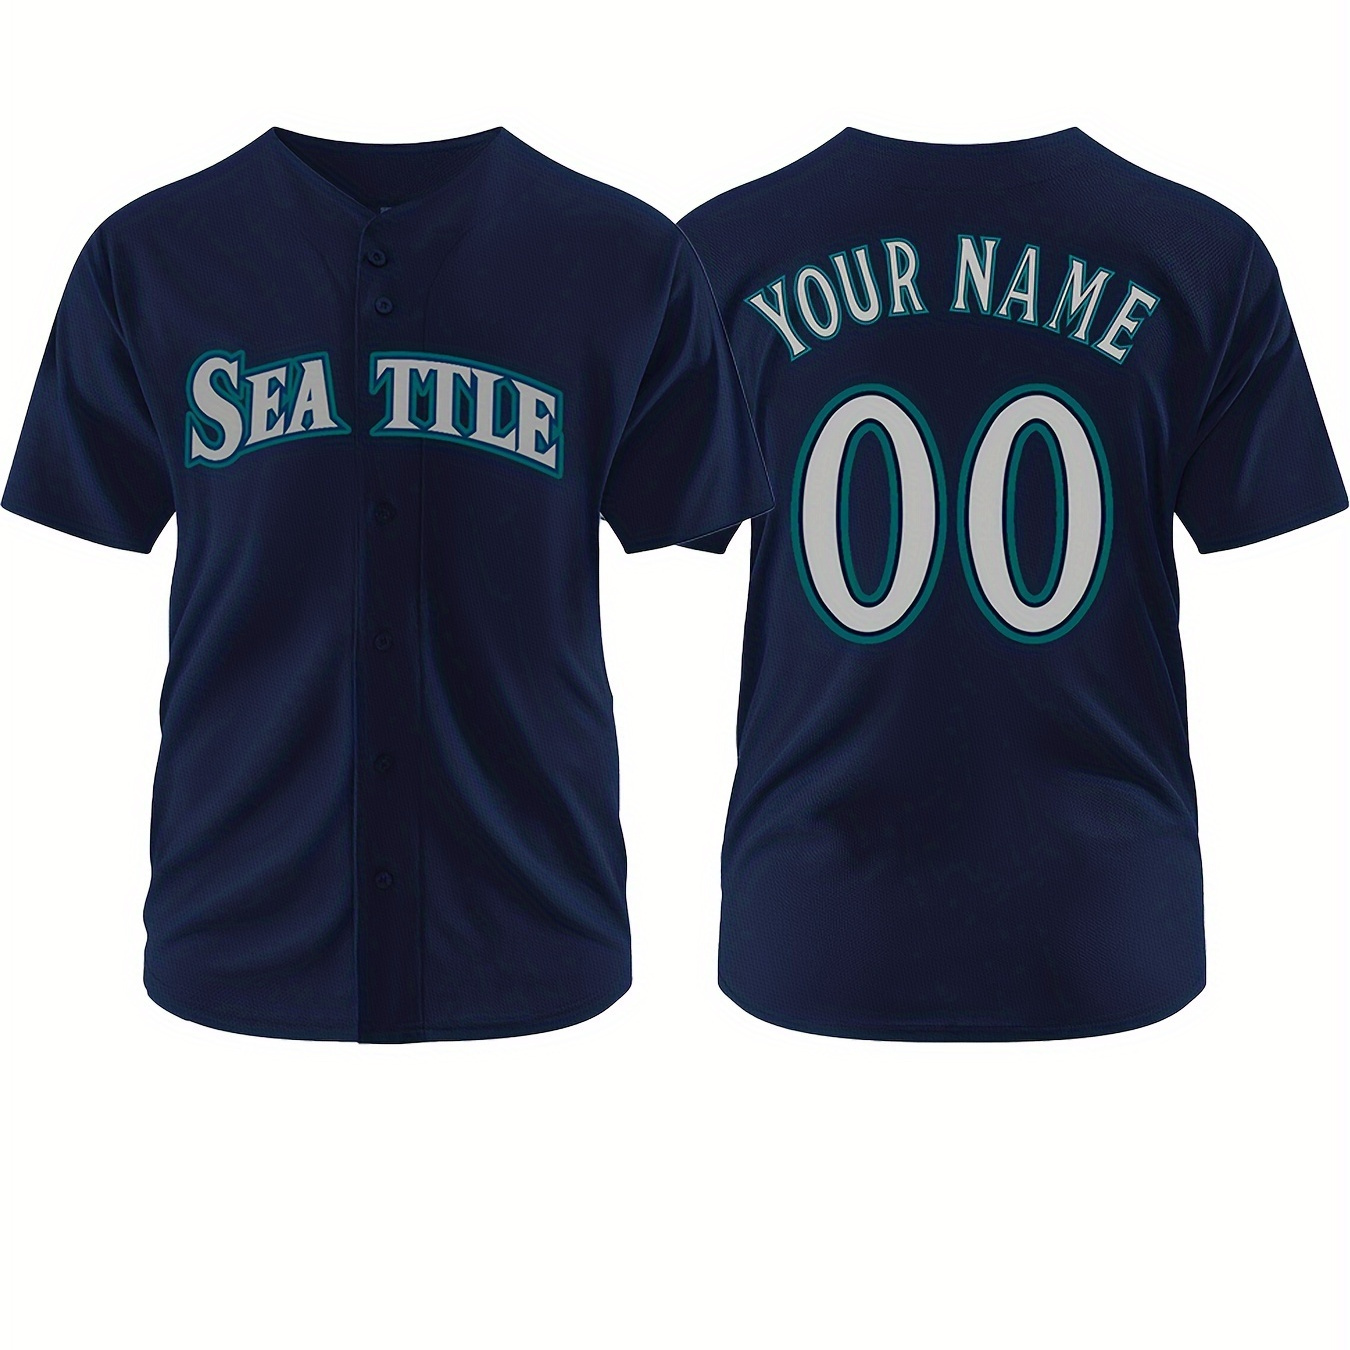 

Men's "seattle" Pattern And Customized Name And Number Print Short Sleeve And Button Up Baseball Jersey, Chic And Stylish Sports Tops For Summer Outdoors Wear